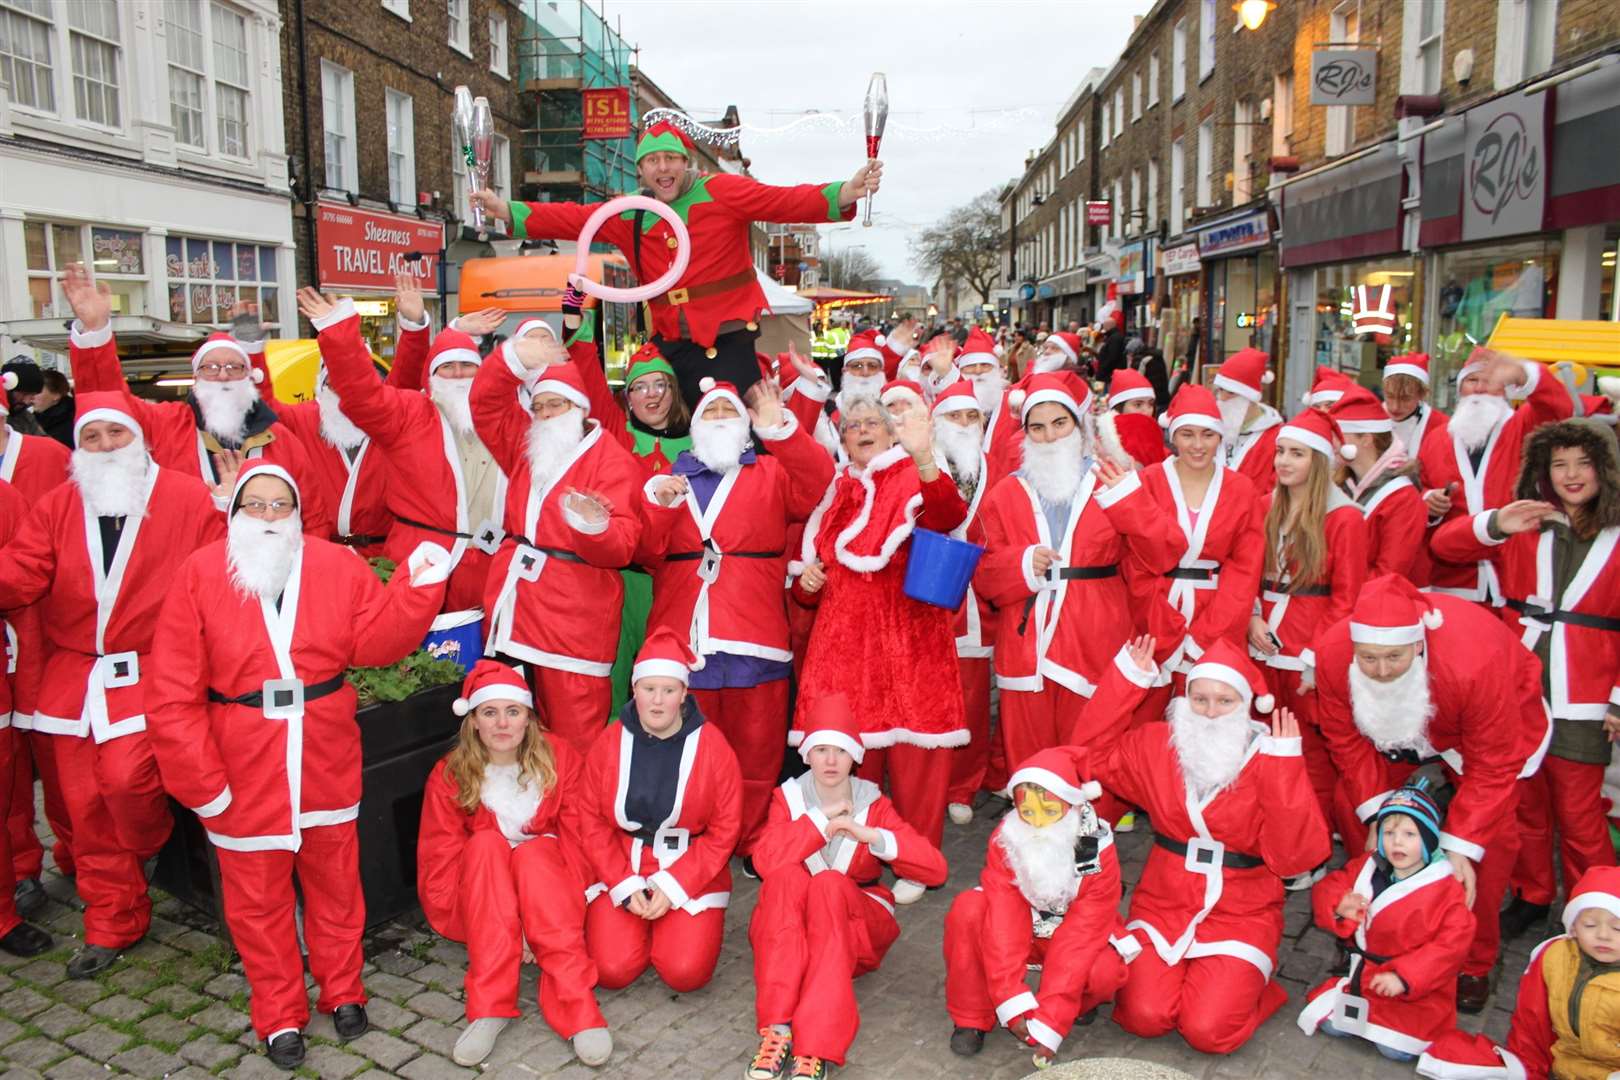 The annual Sheppey Santa Saunter in Sheerness organised by Minster Rotary Club